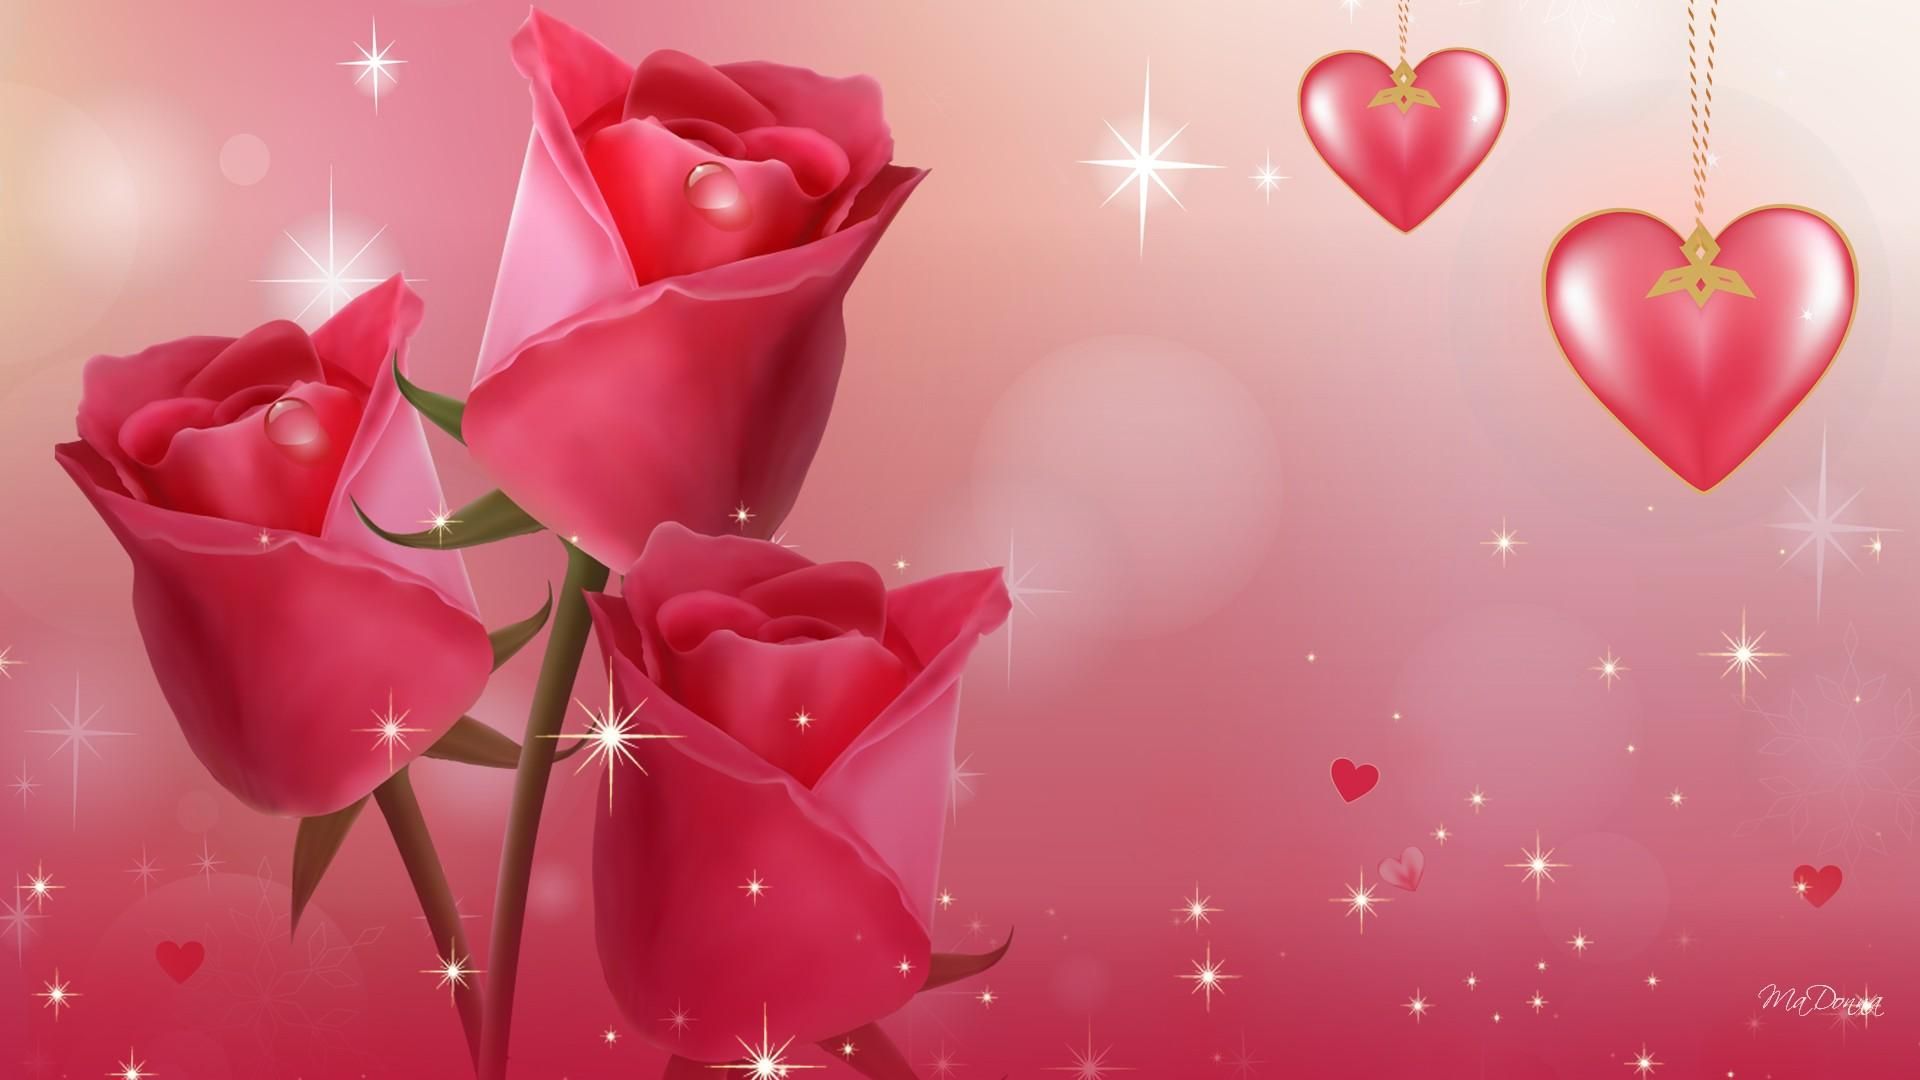 Most Beautiful Love Wallpapers HD Pictures | Live HD Wallpaper HQ ...